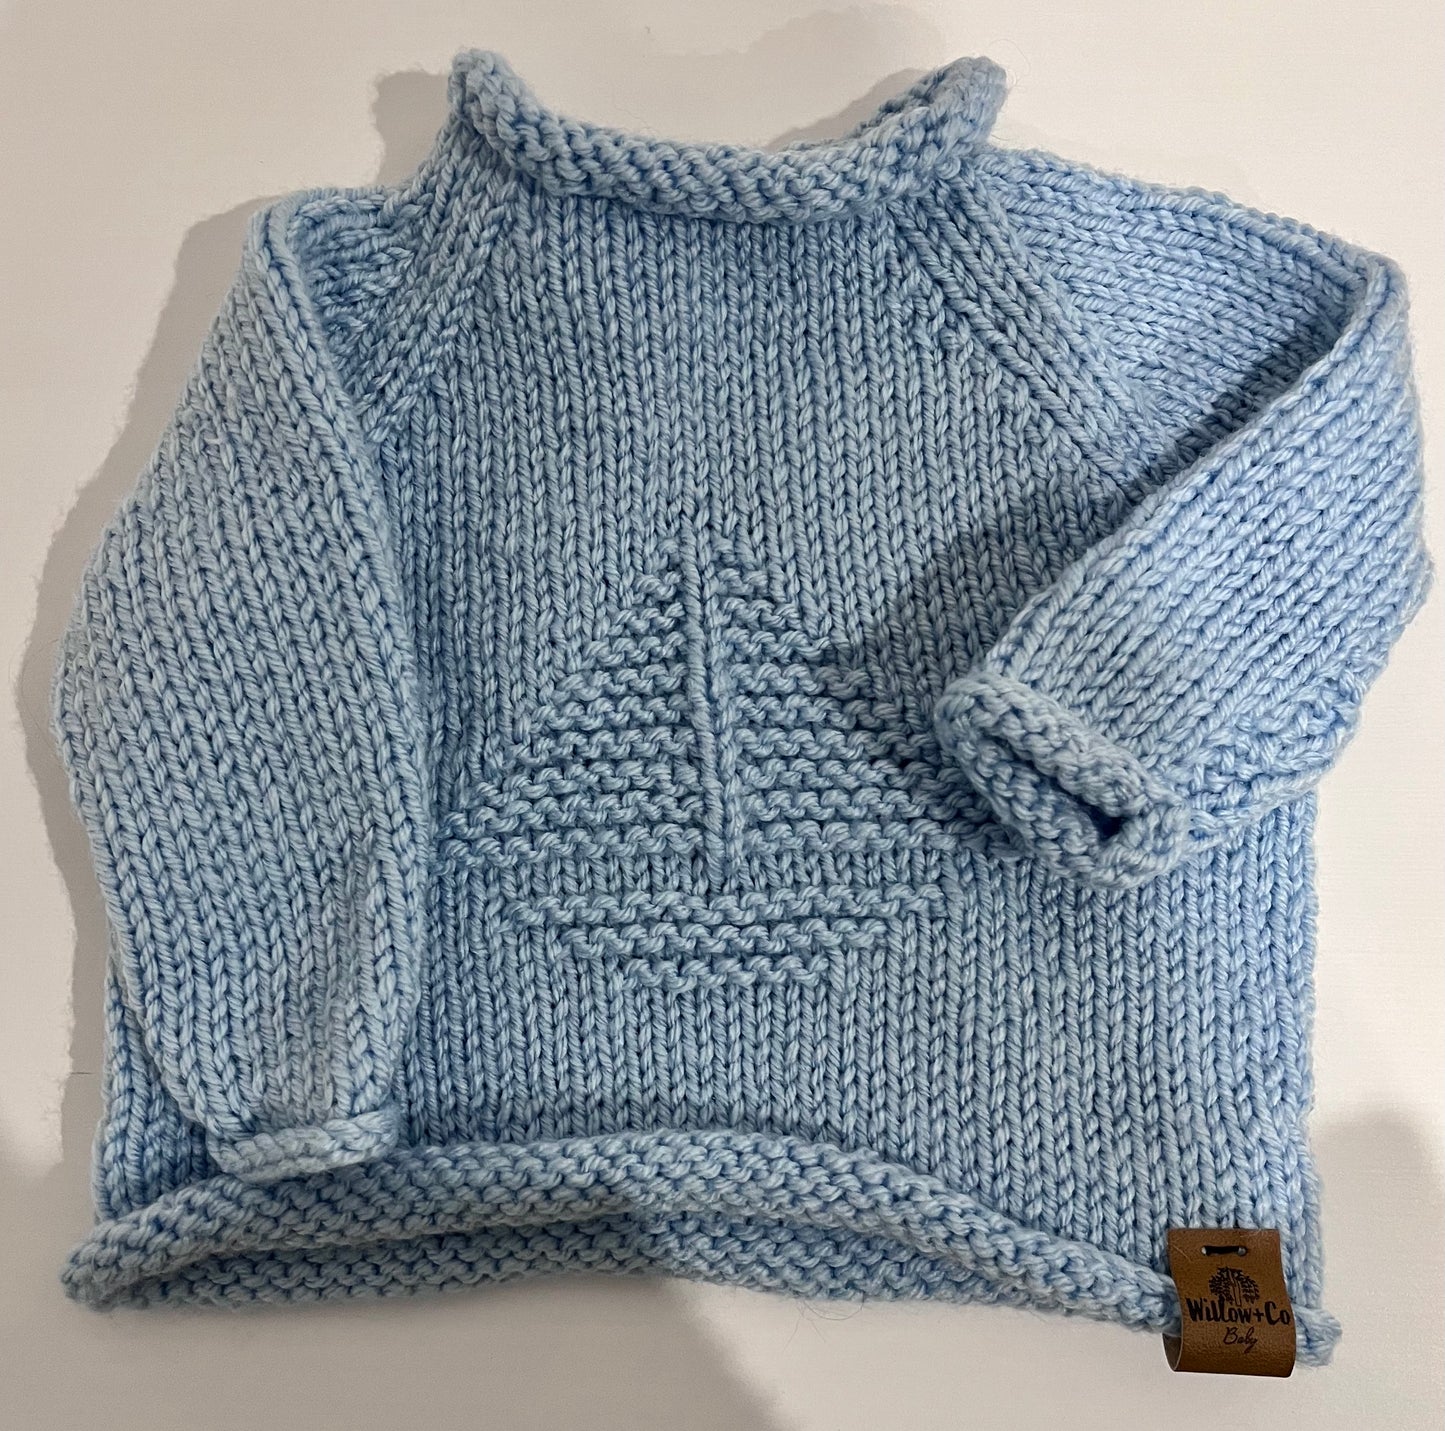 HAND KNITTED JUMPER WITH SAIL BOAT DETAIL - BABY BLUE